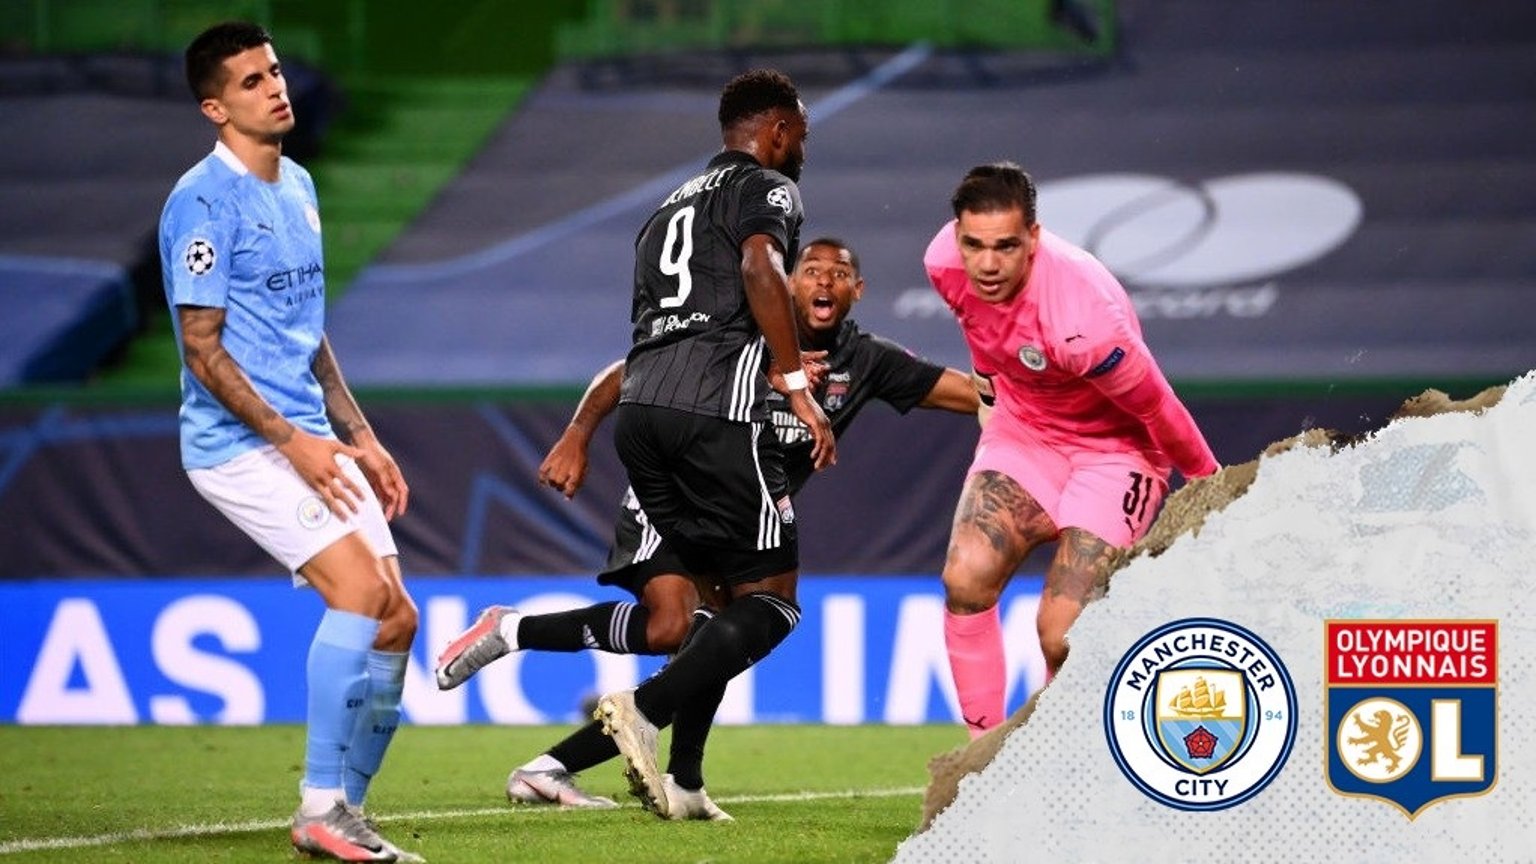 City’s Champions League hopes ended by Lyon